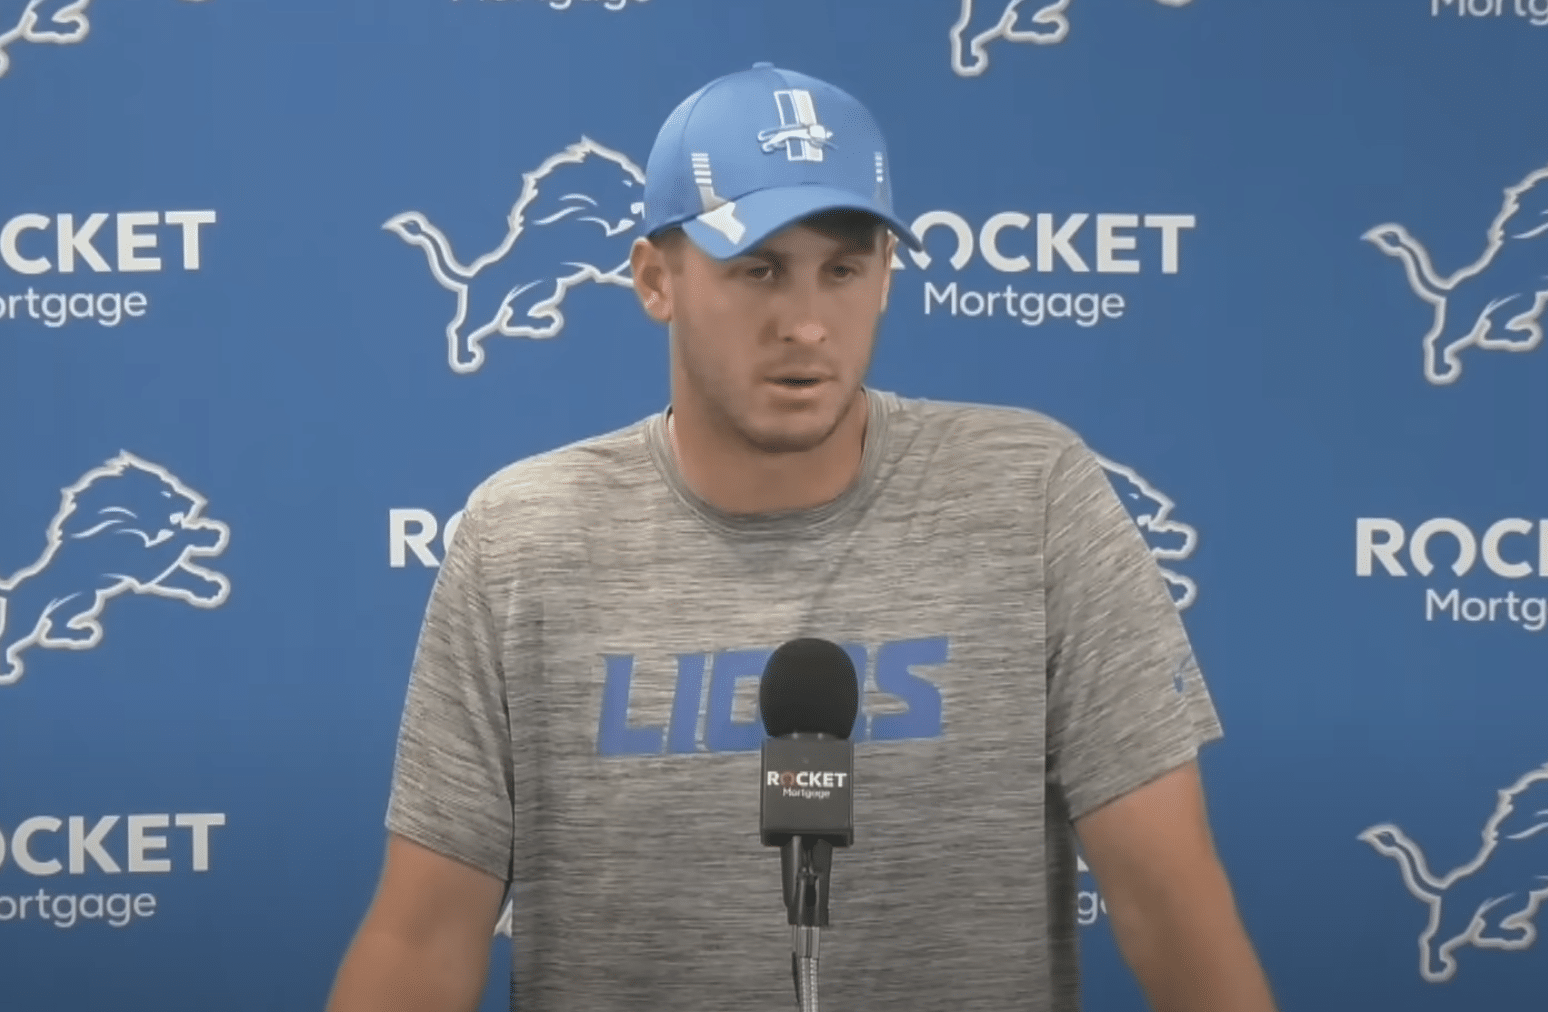 Detroit Lions are built for games Jared Goff Jared Goff comments on getting game ball Jared Goff is fired up